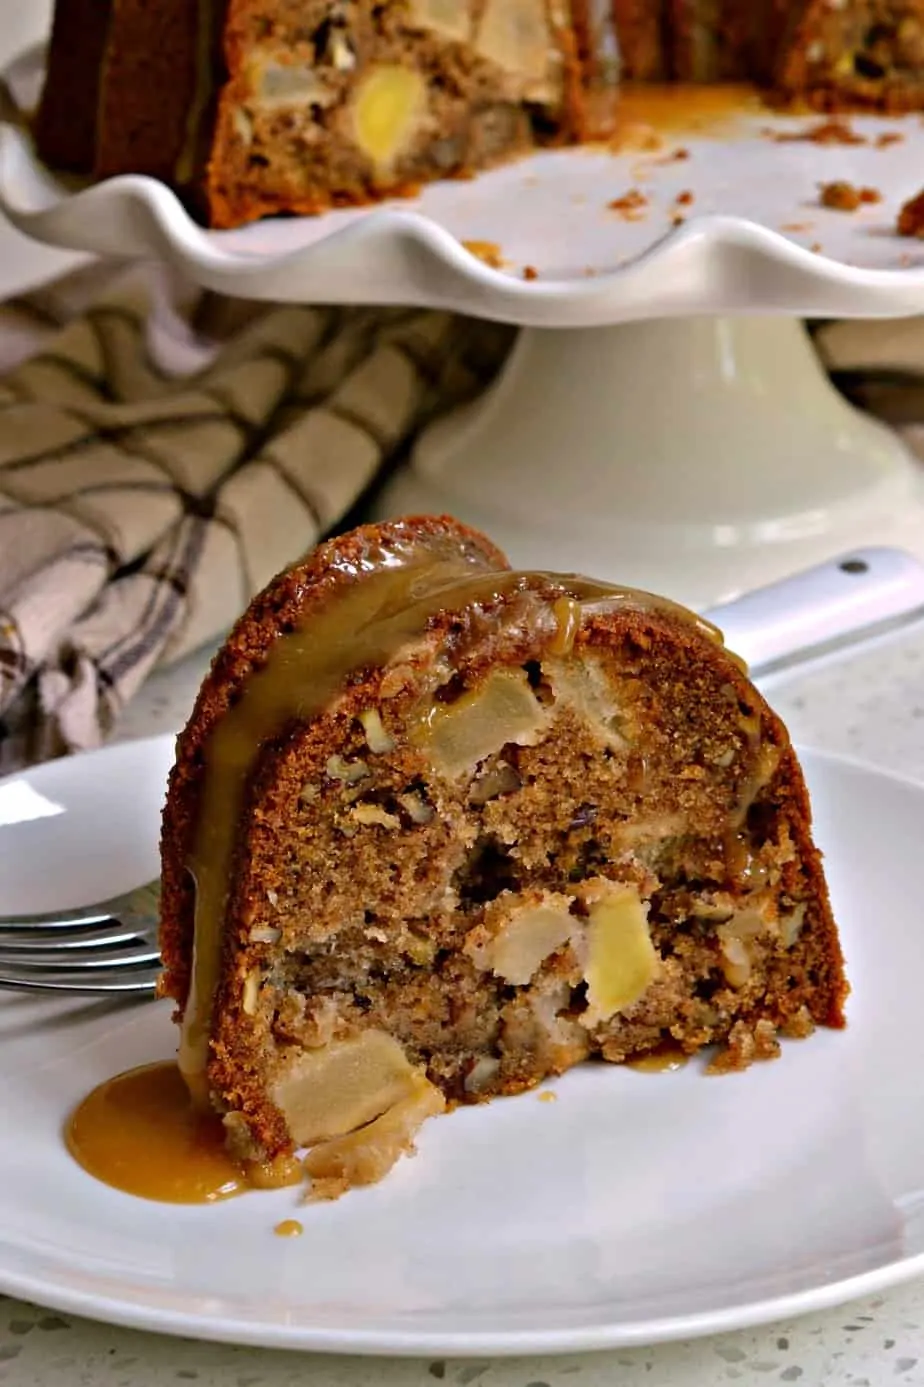 This Apple Cake has a slightly crunchy crust and a soft moist center that is loaded with chunks of sweet apple and pecans.